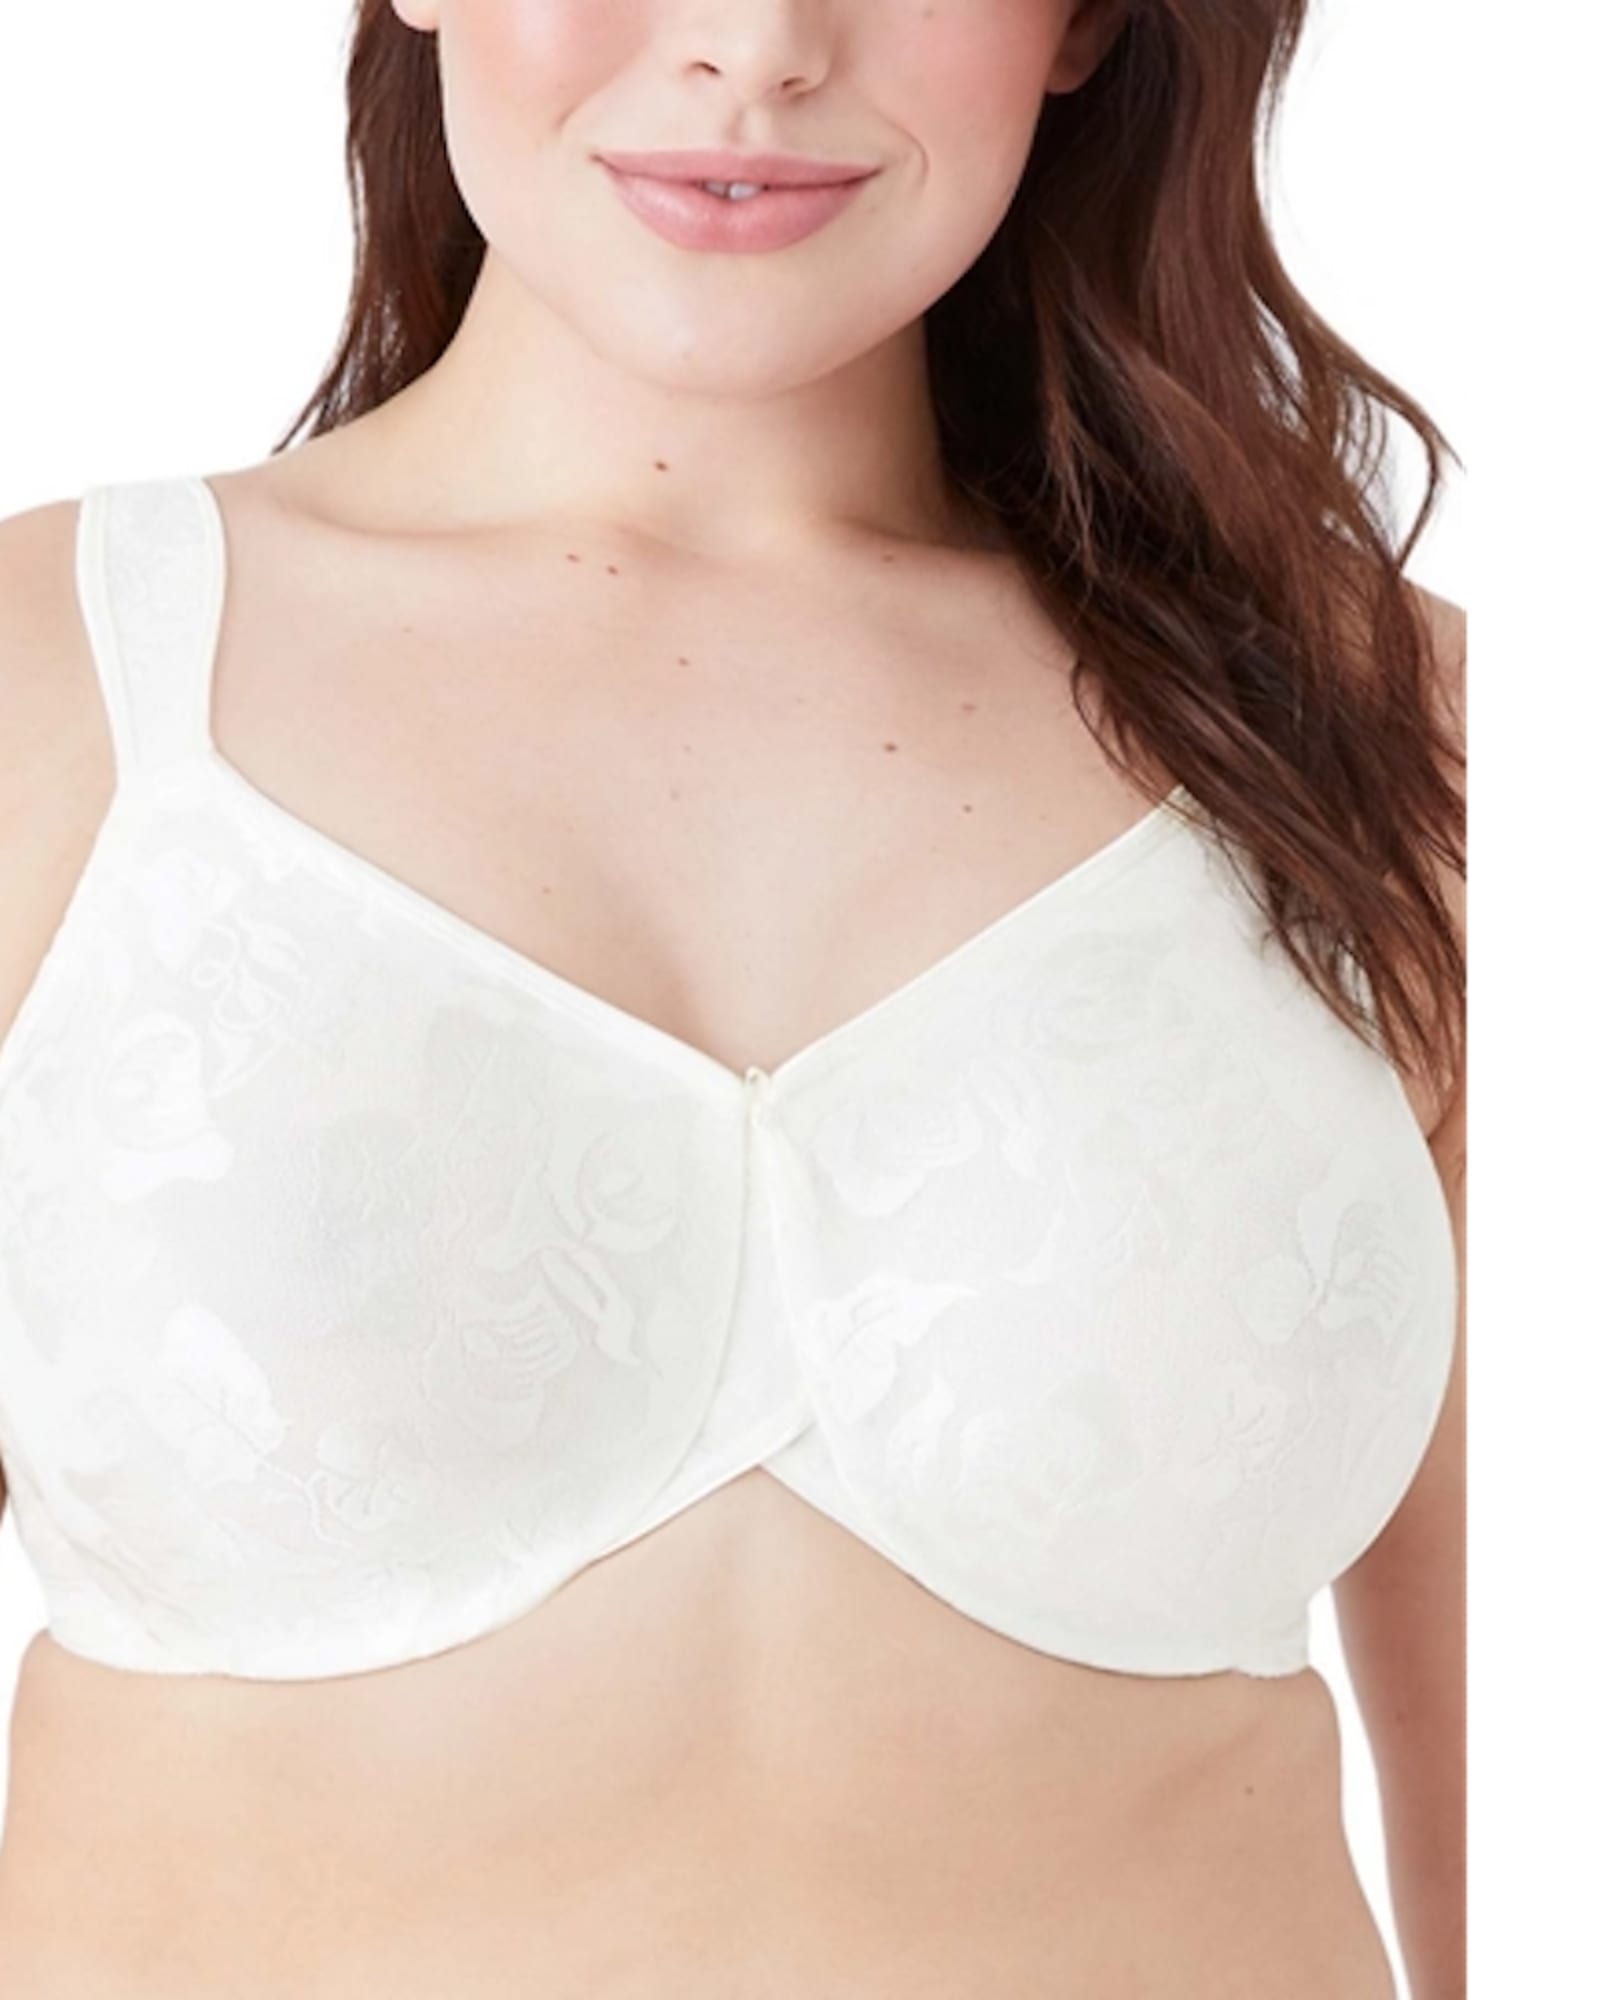 Fashion Women's Smooth Jacquard Underwire Firm Contour Support